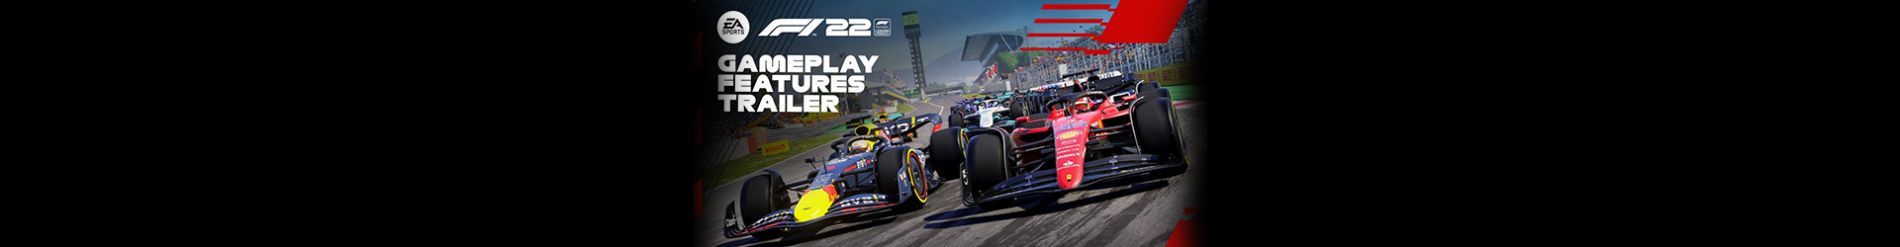 'Jericho' by Jacknife & The Bloody Beetroots in Formula 1 Gameplay Features Trailer!